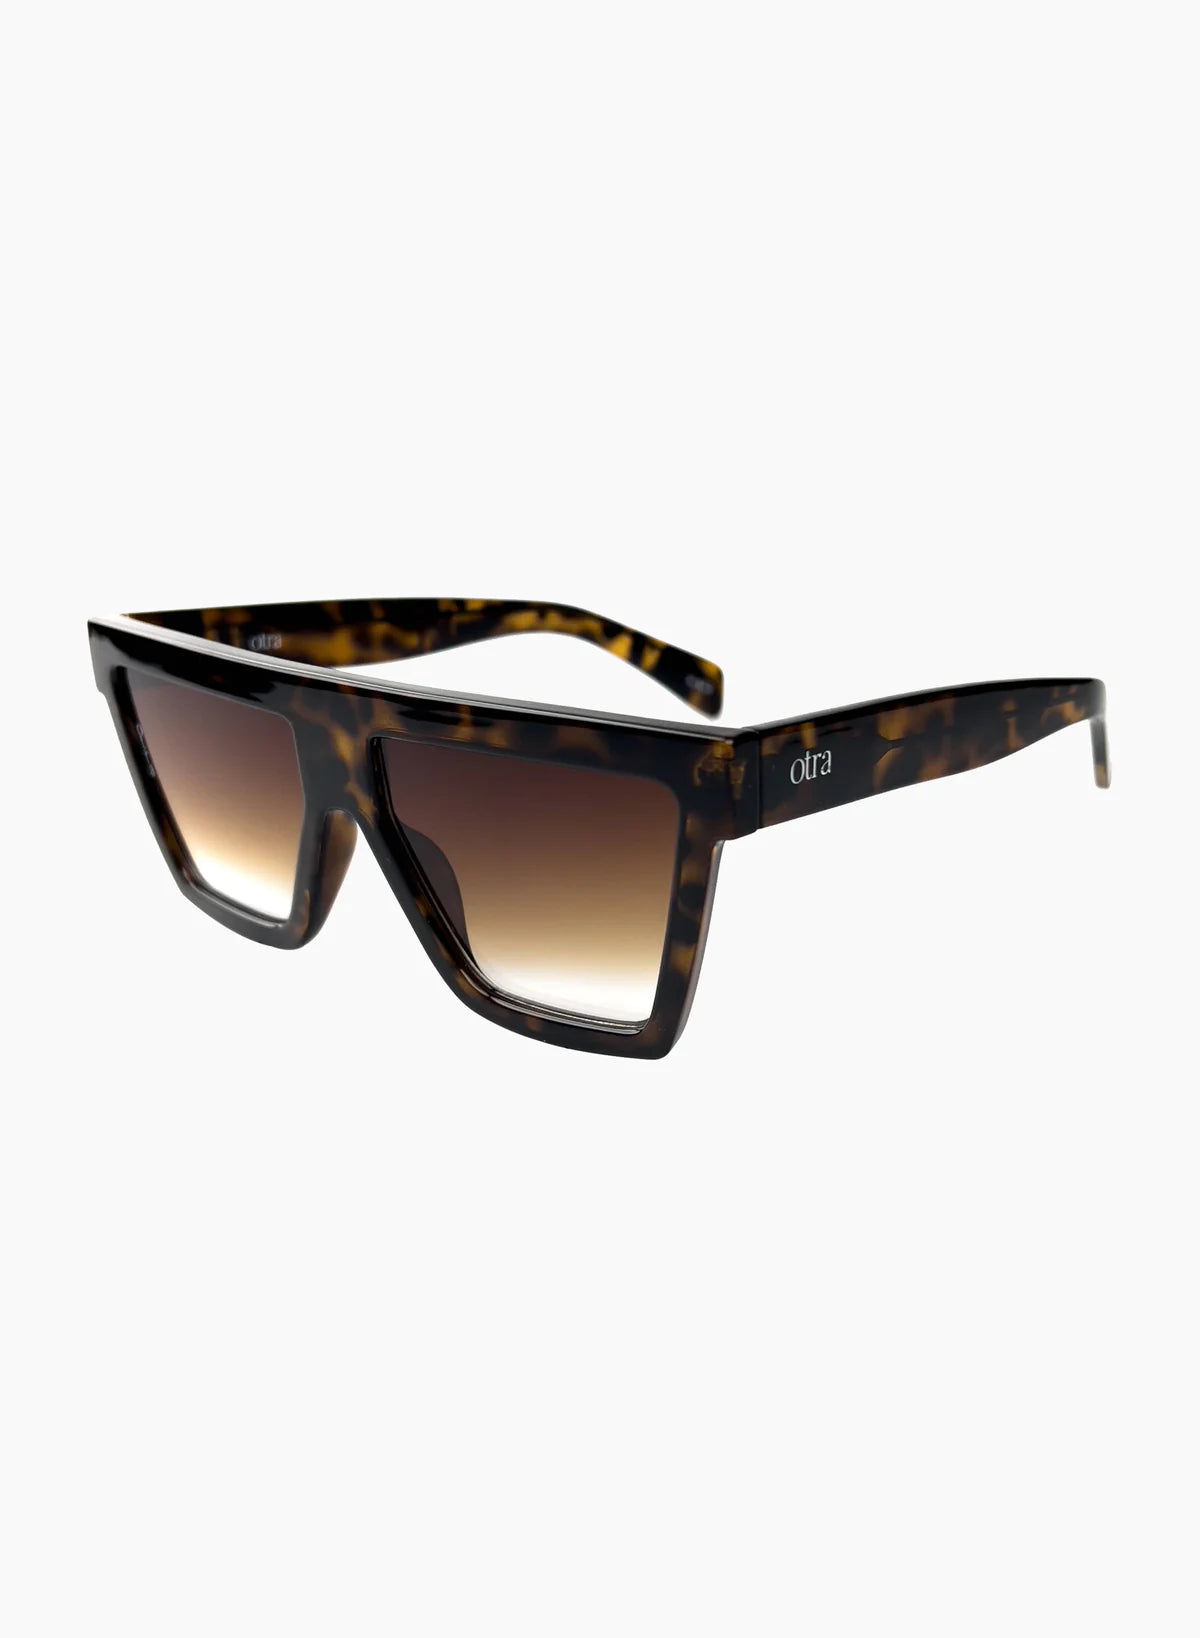 Rae Sunglasses Tort Brown Fade, Sunglass Acc by Otra | LIT Boutique